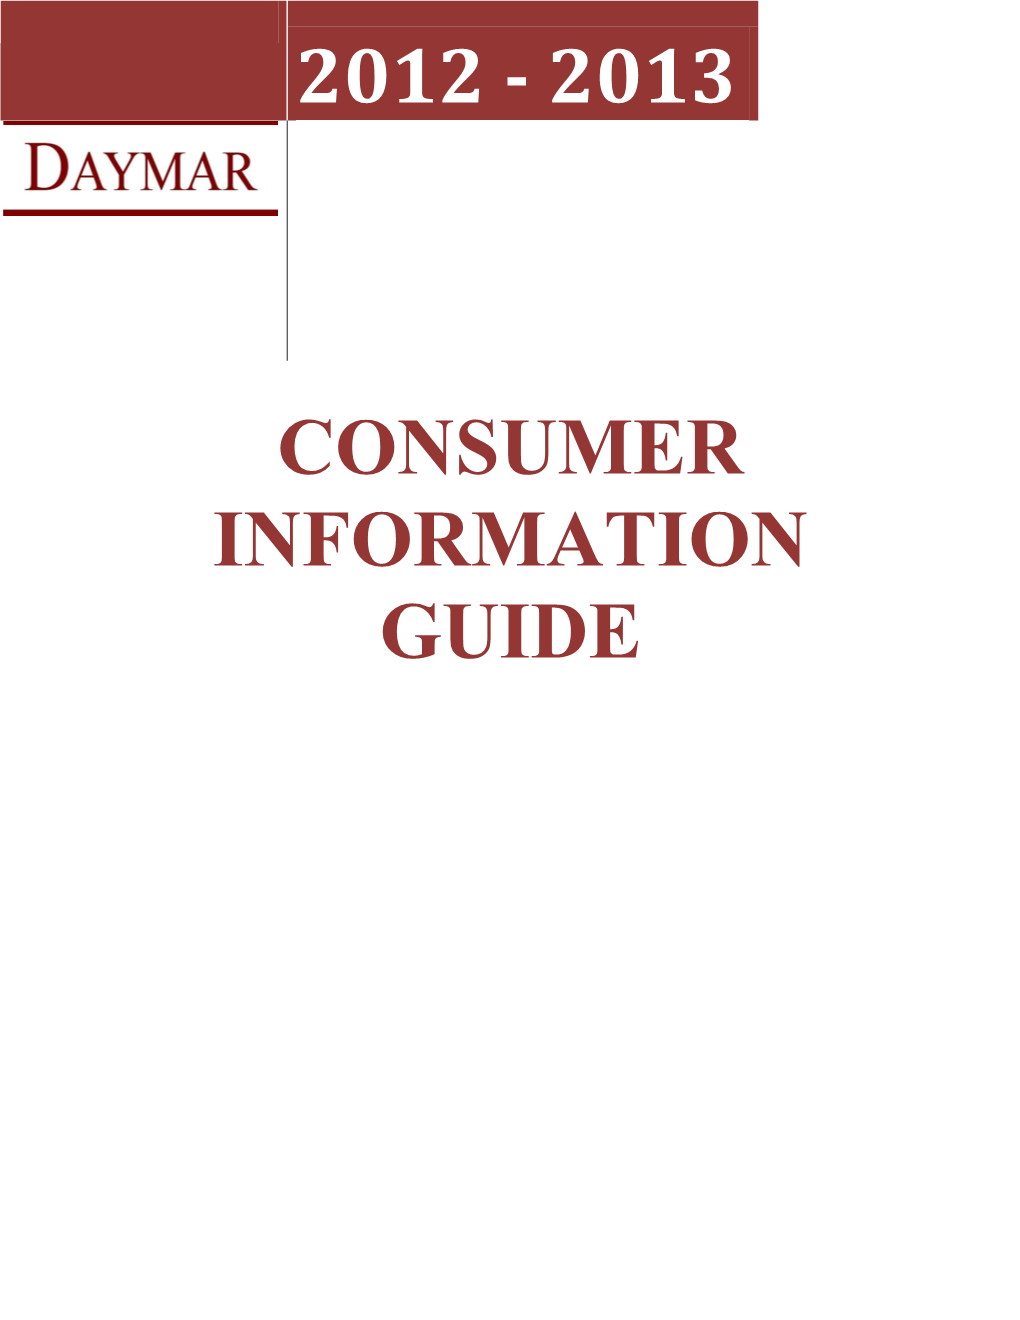 Consumer Information Guide